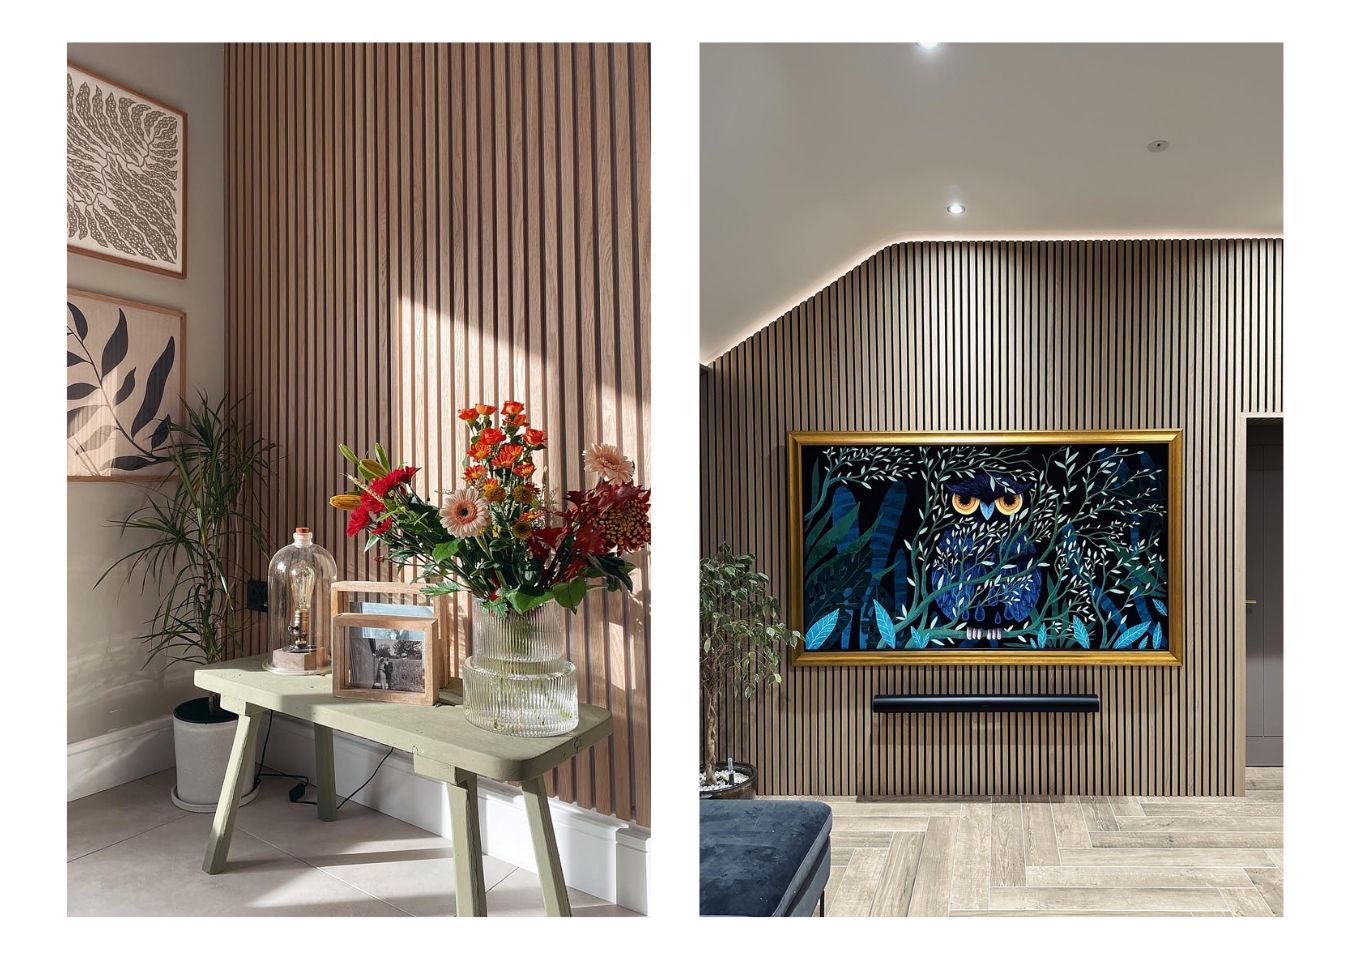 Two images of a wall covered in SlatWall, one on the left has a small table with flowers in front, the one on the right has a TV on the wall with a gold frame around 